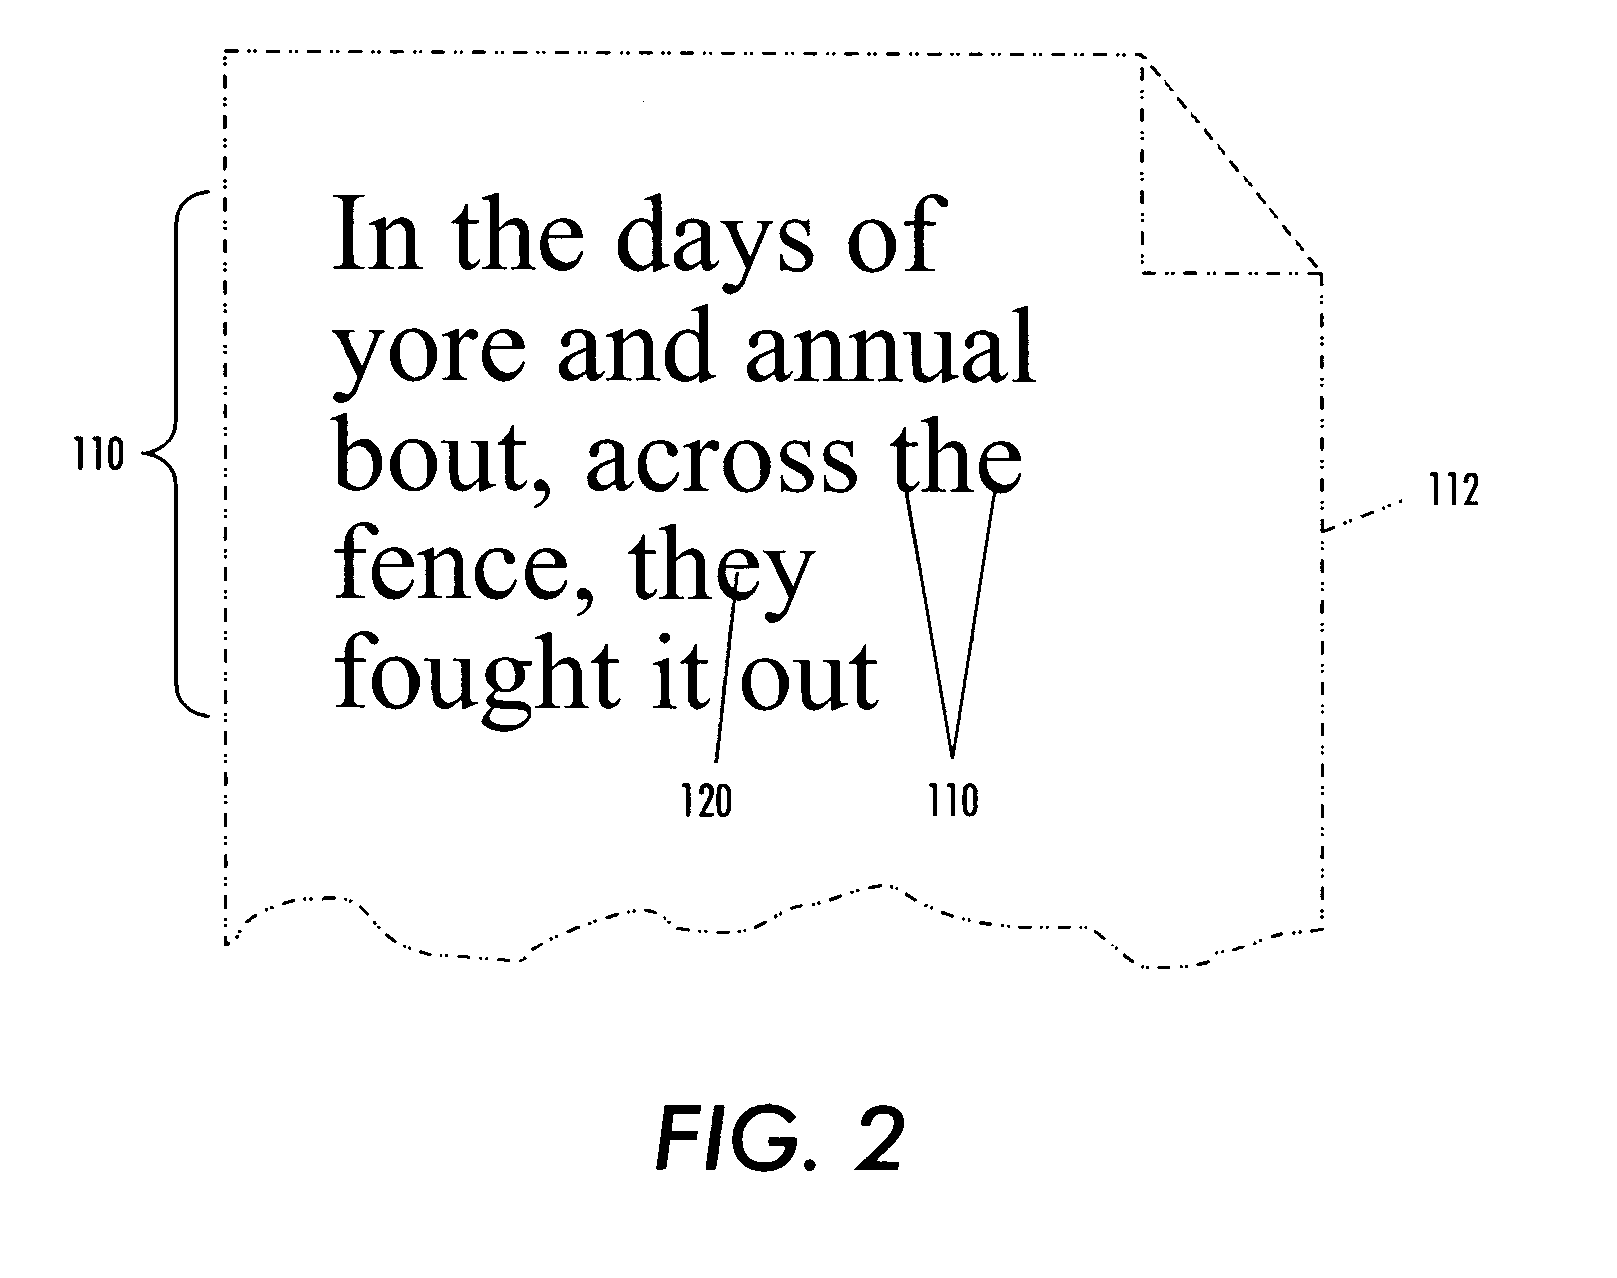 Magnetic watermark for text documents